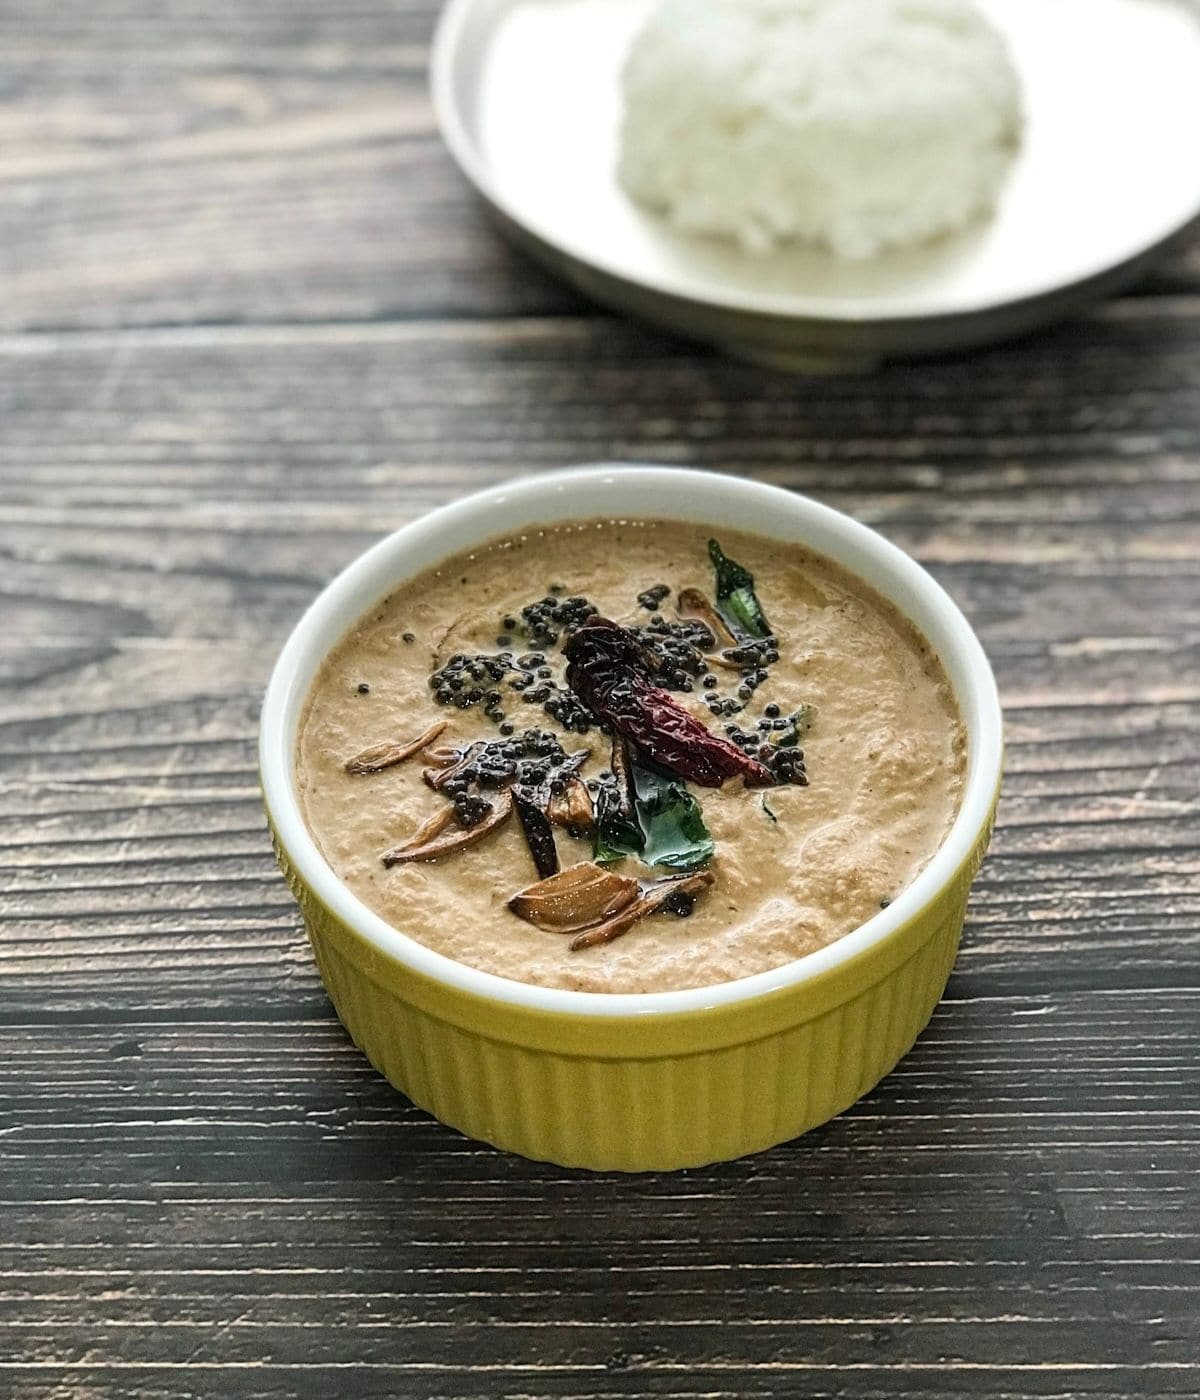 Fall in love with this super healthy Banana Flower Chutney